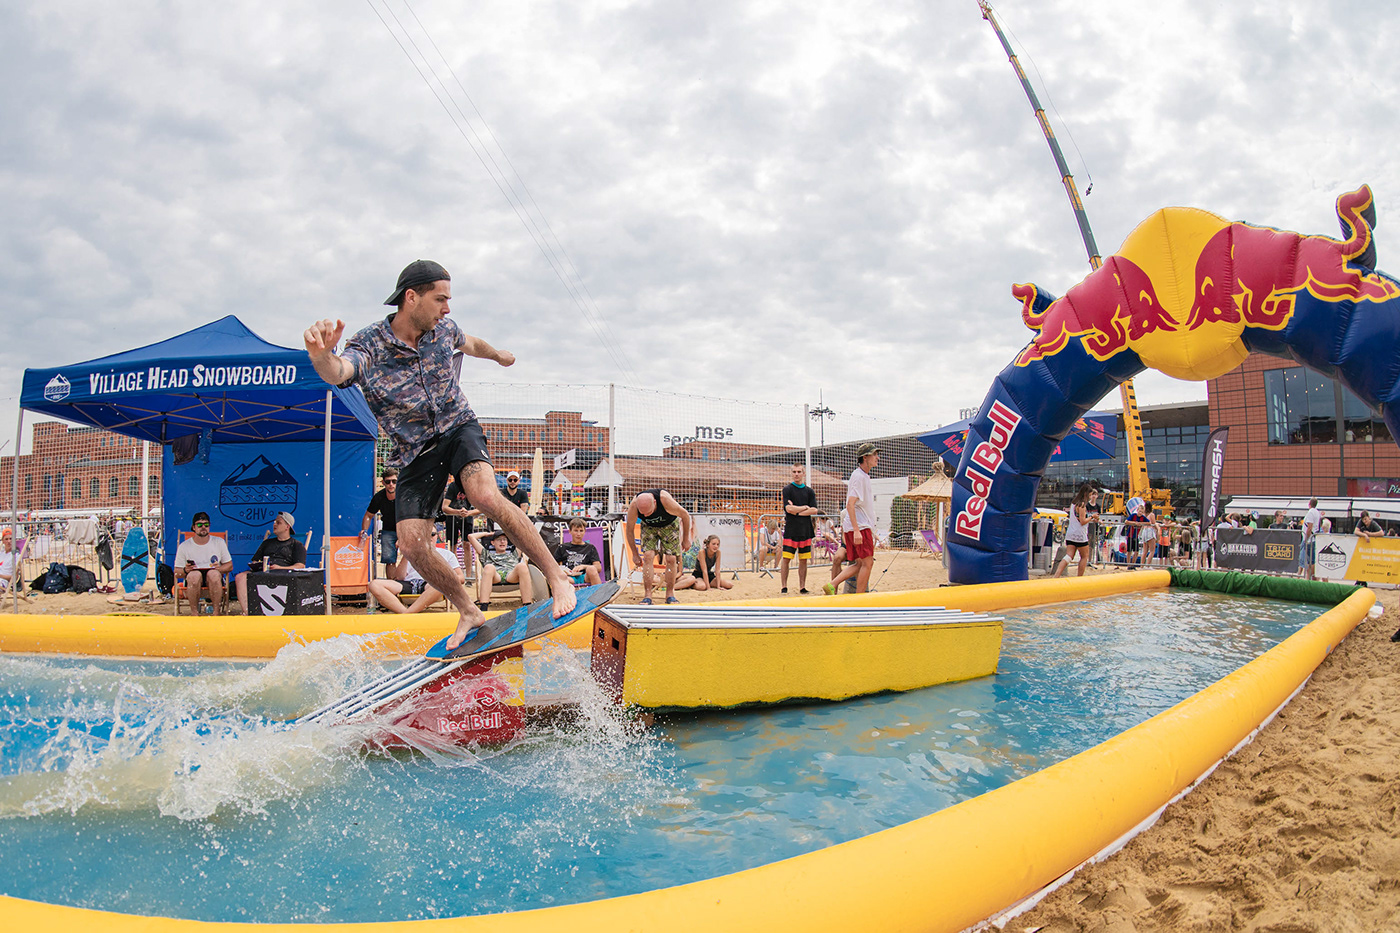 challenge Competition movement photographer Red Bull skimboard sport Sport Photography Tournament Watersports